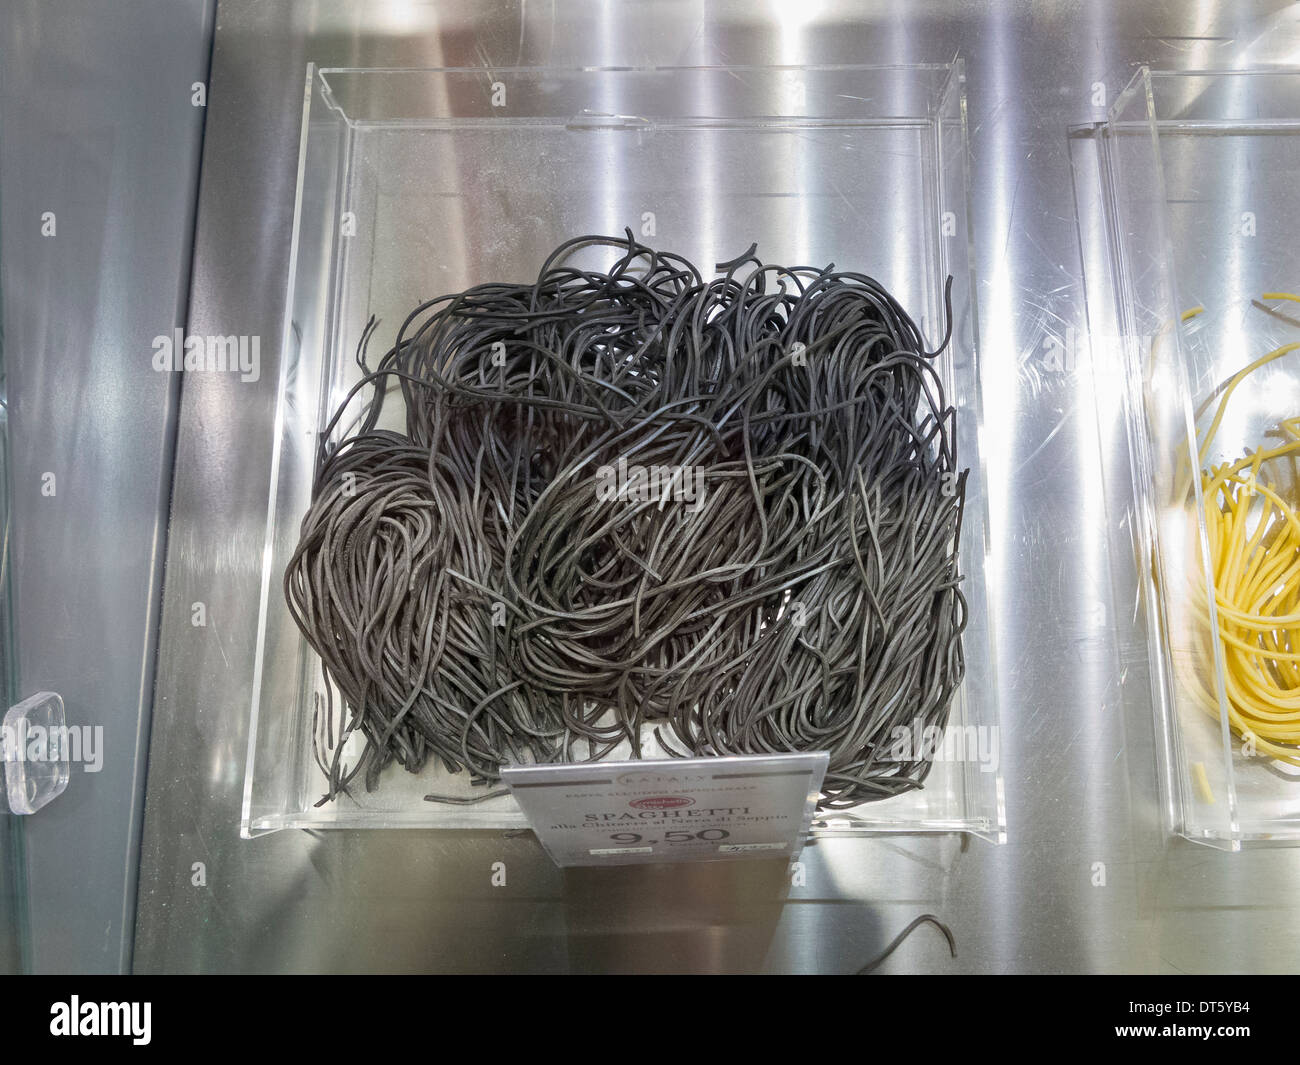 Spaghetti black squid ink at a food store in Italy Stock Photo